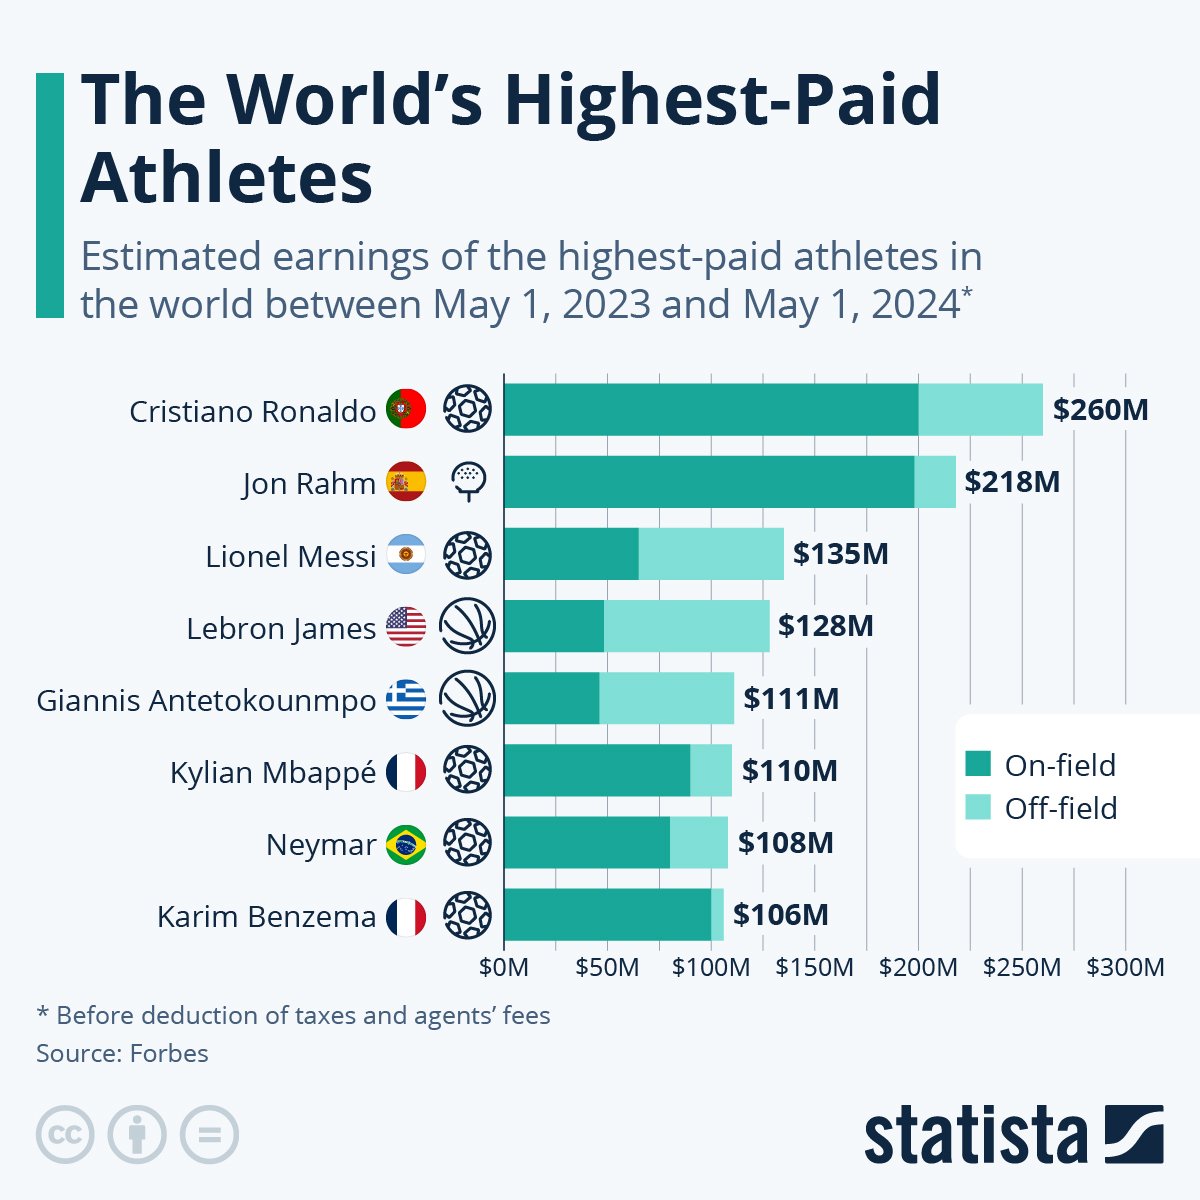 Statista graphic showing the Top 8 of the World's Highest-Paid Athletes and their estimated earnings.